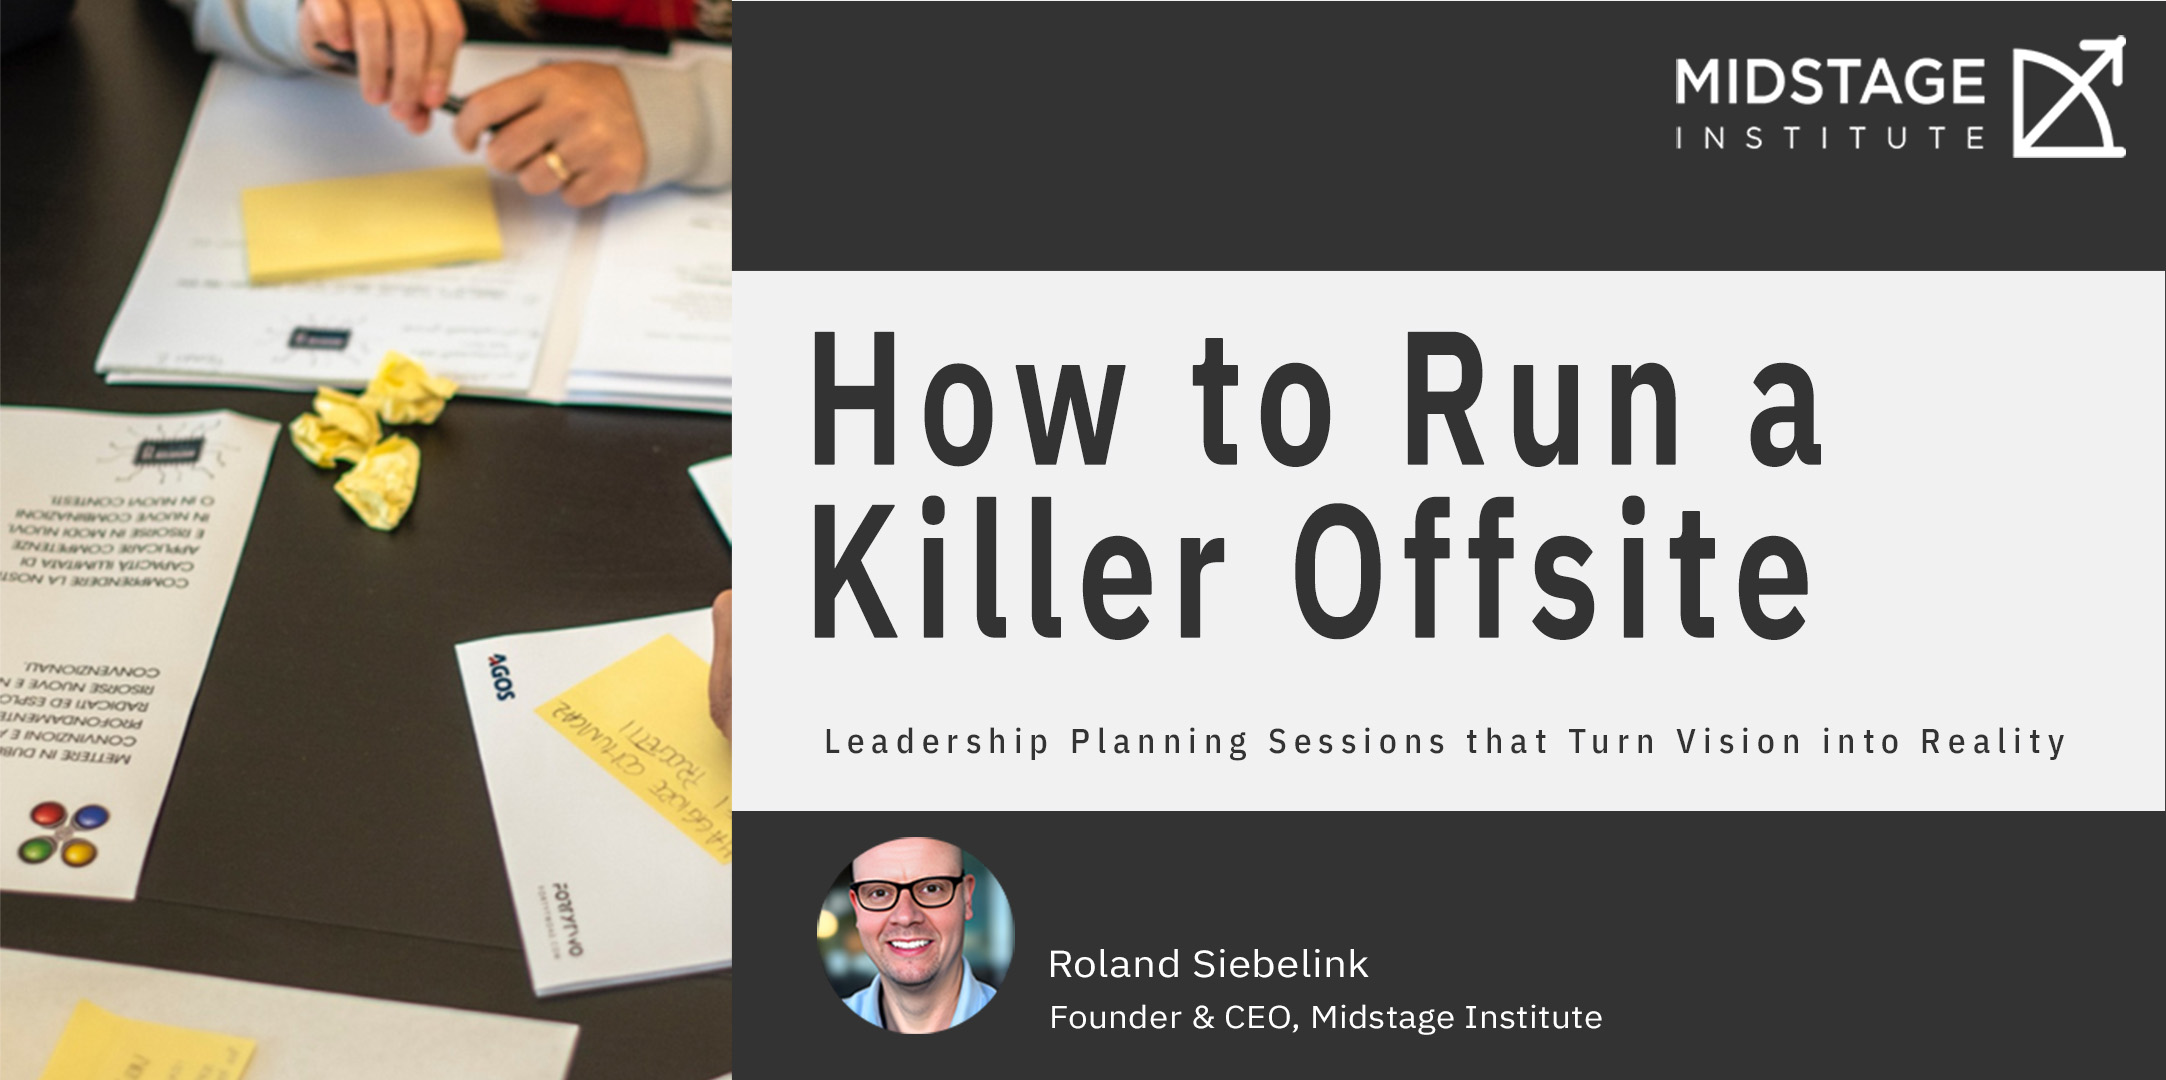 10 Tips for Running a Killer Offsite Leadership Planning Sessions that Turn Vision into Reality